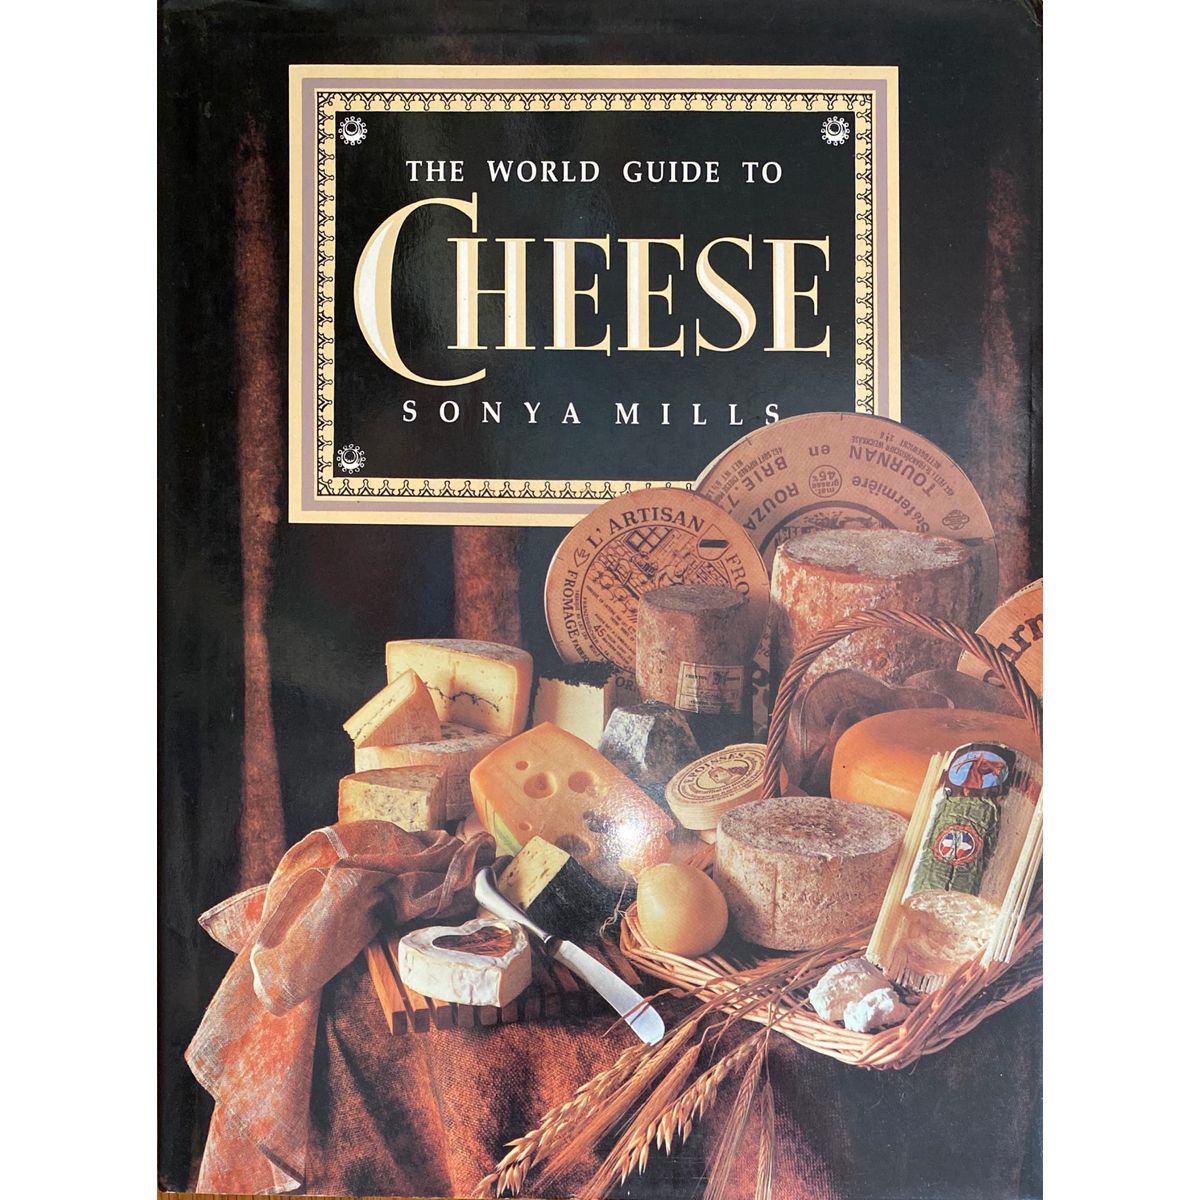 ISBN: 9780831795405 / 0831795409 - The World Guide to Cheese by Sonya Mills [1988]